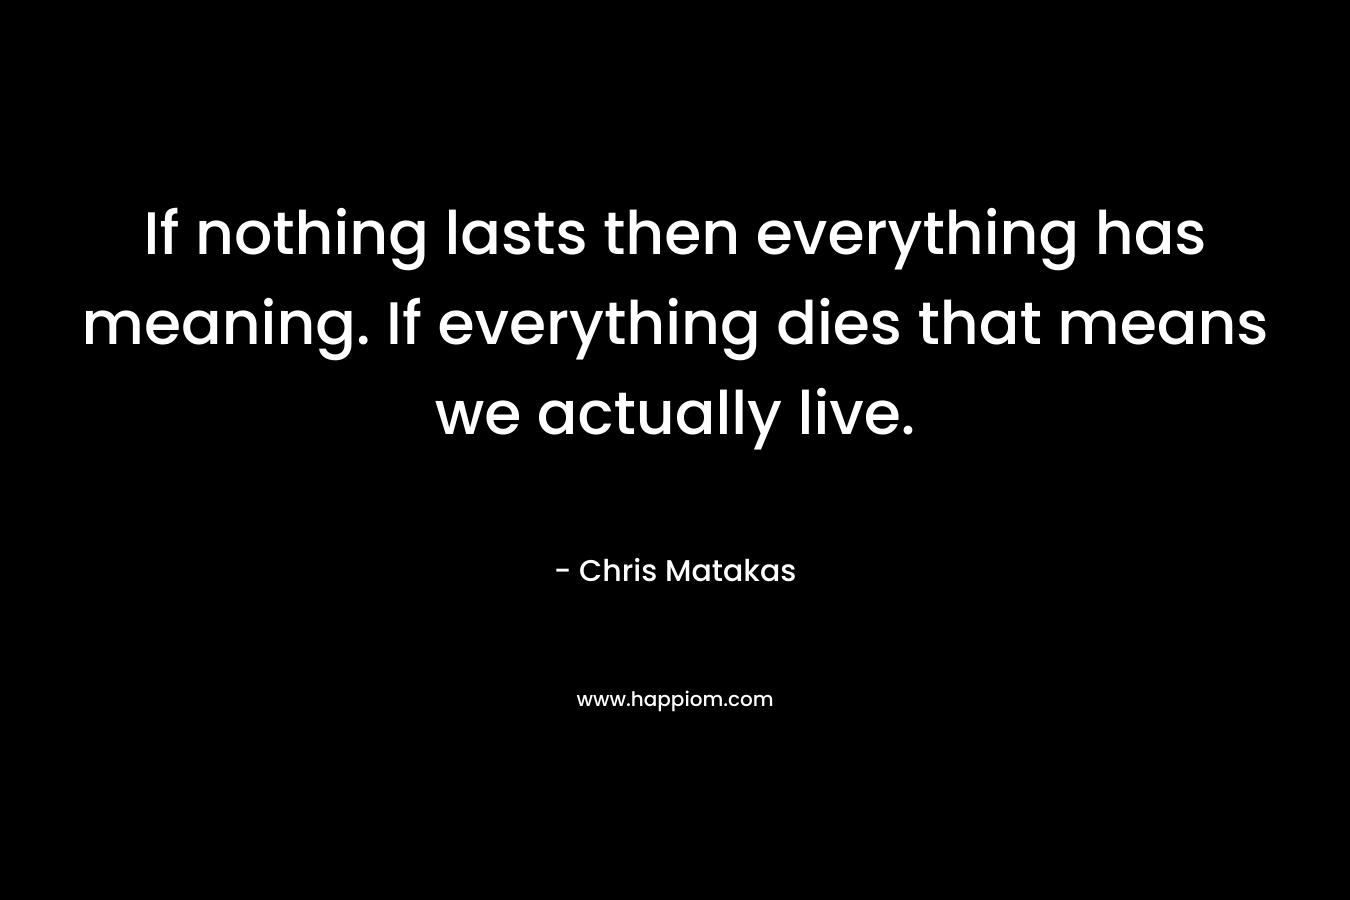 If nothing lasts then everything has meaning. If everything dies that means we actually live.